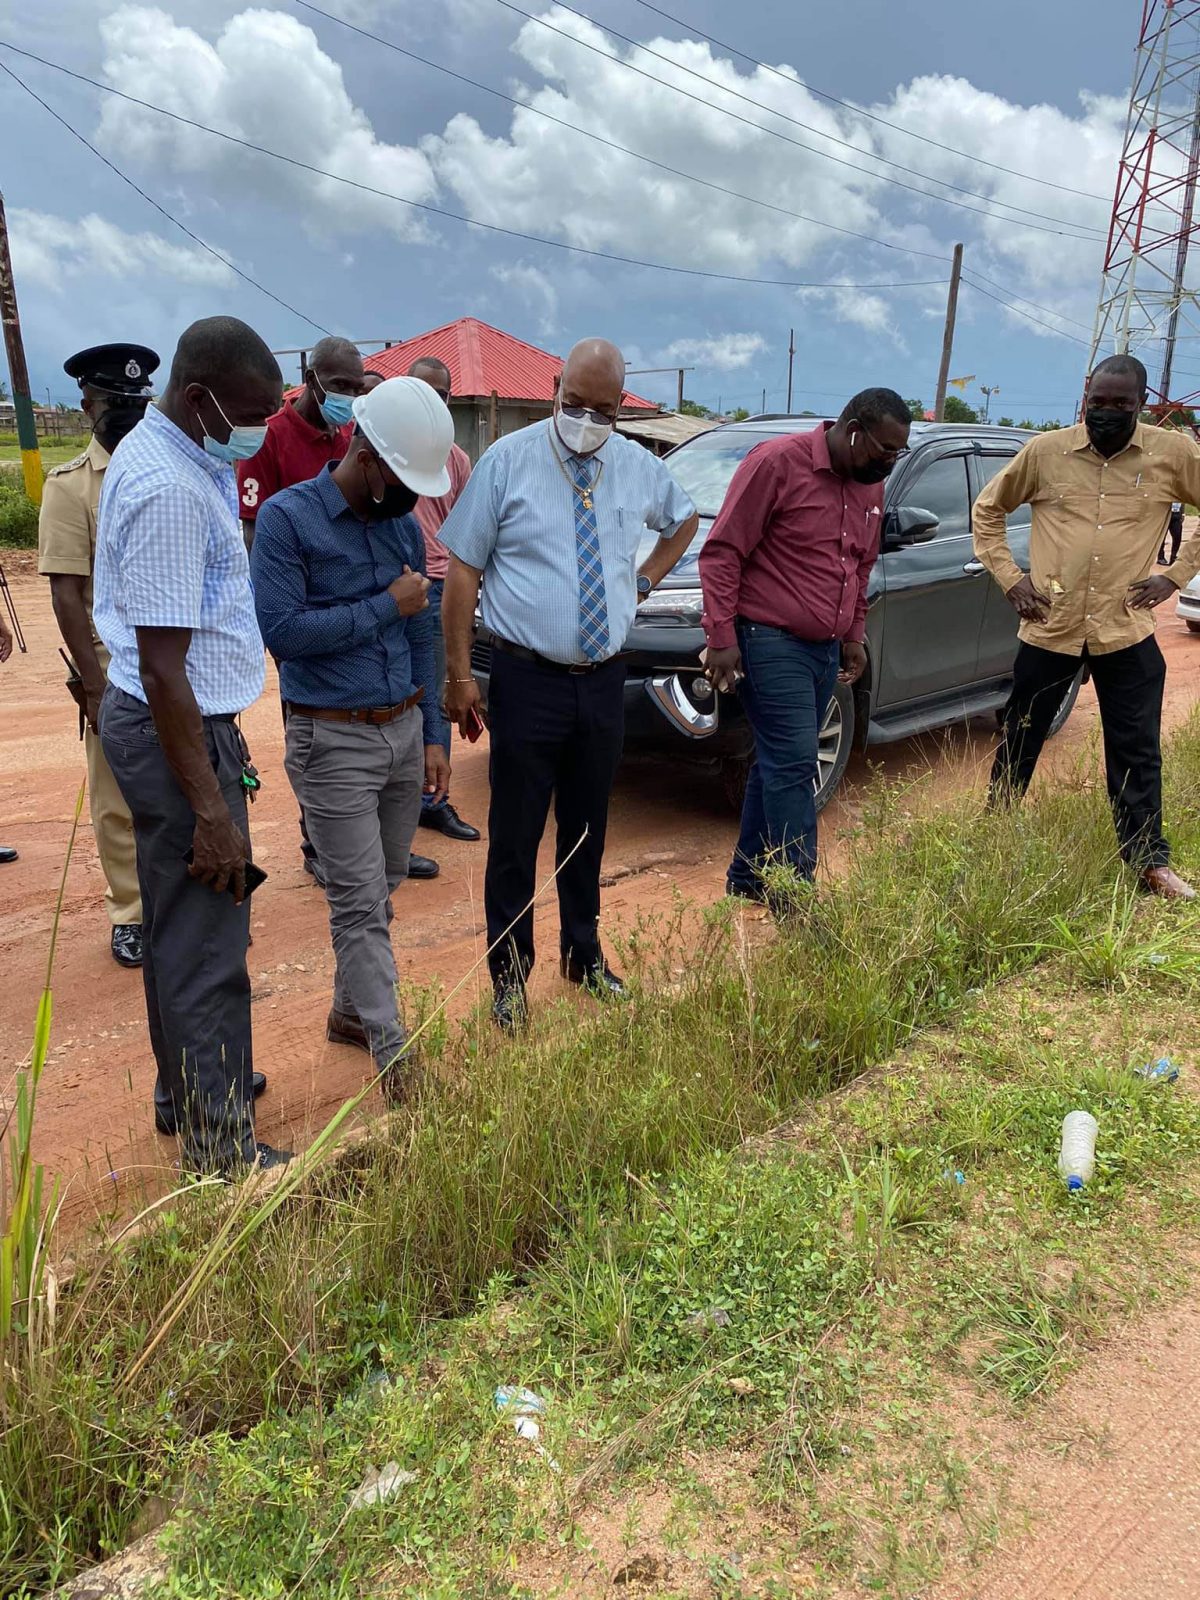 Minister of Public Works Juan Edghill (third from left) inspecting the Block 22 Main Access Road in Linden, Region 10 yesterday. (Ministry of Public Works photo)